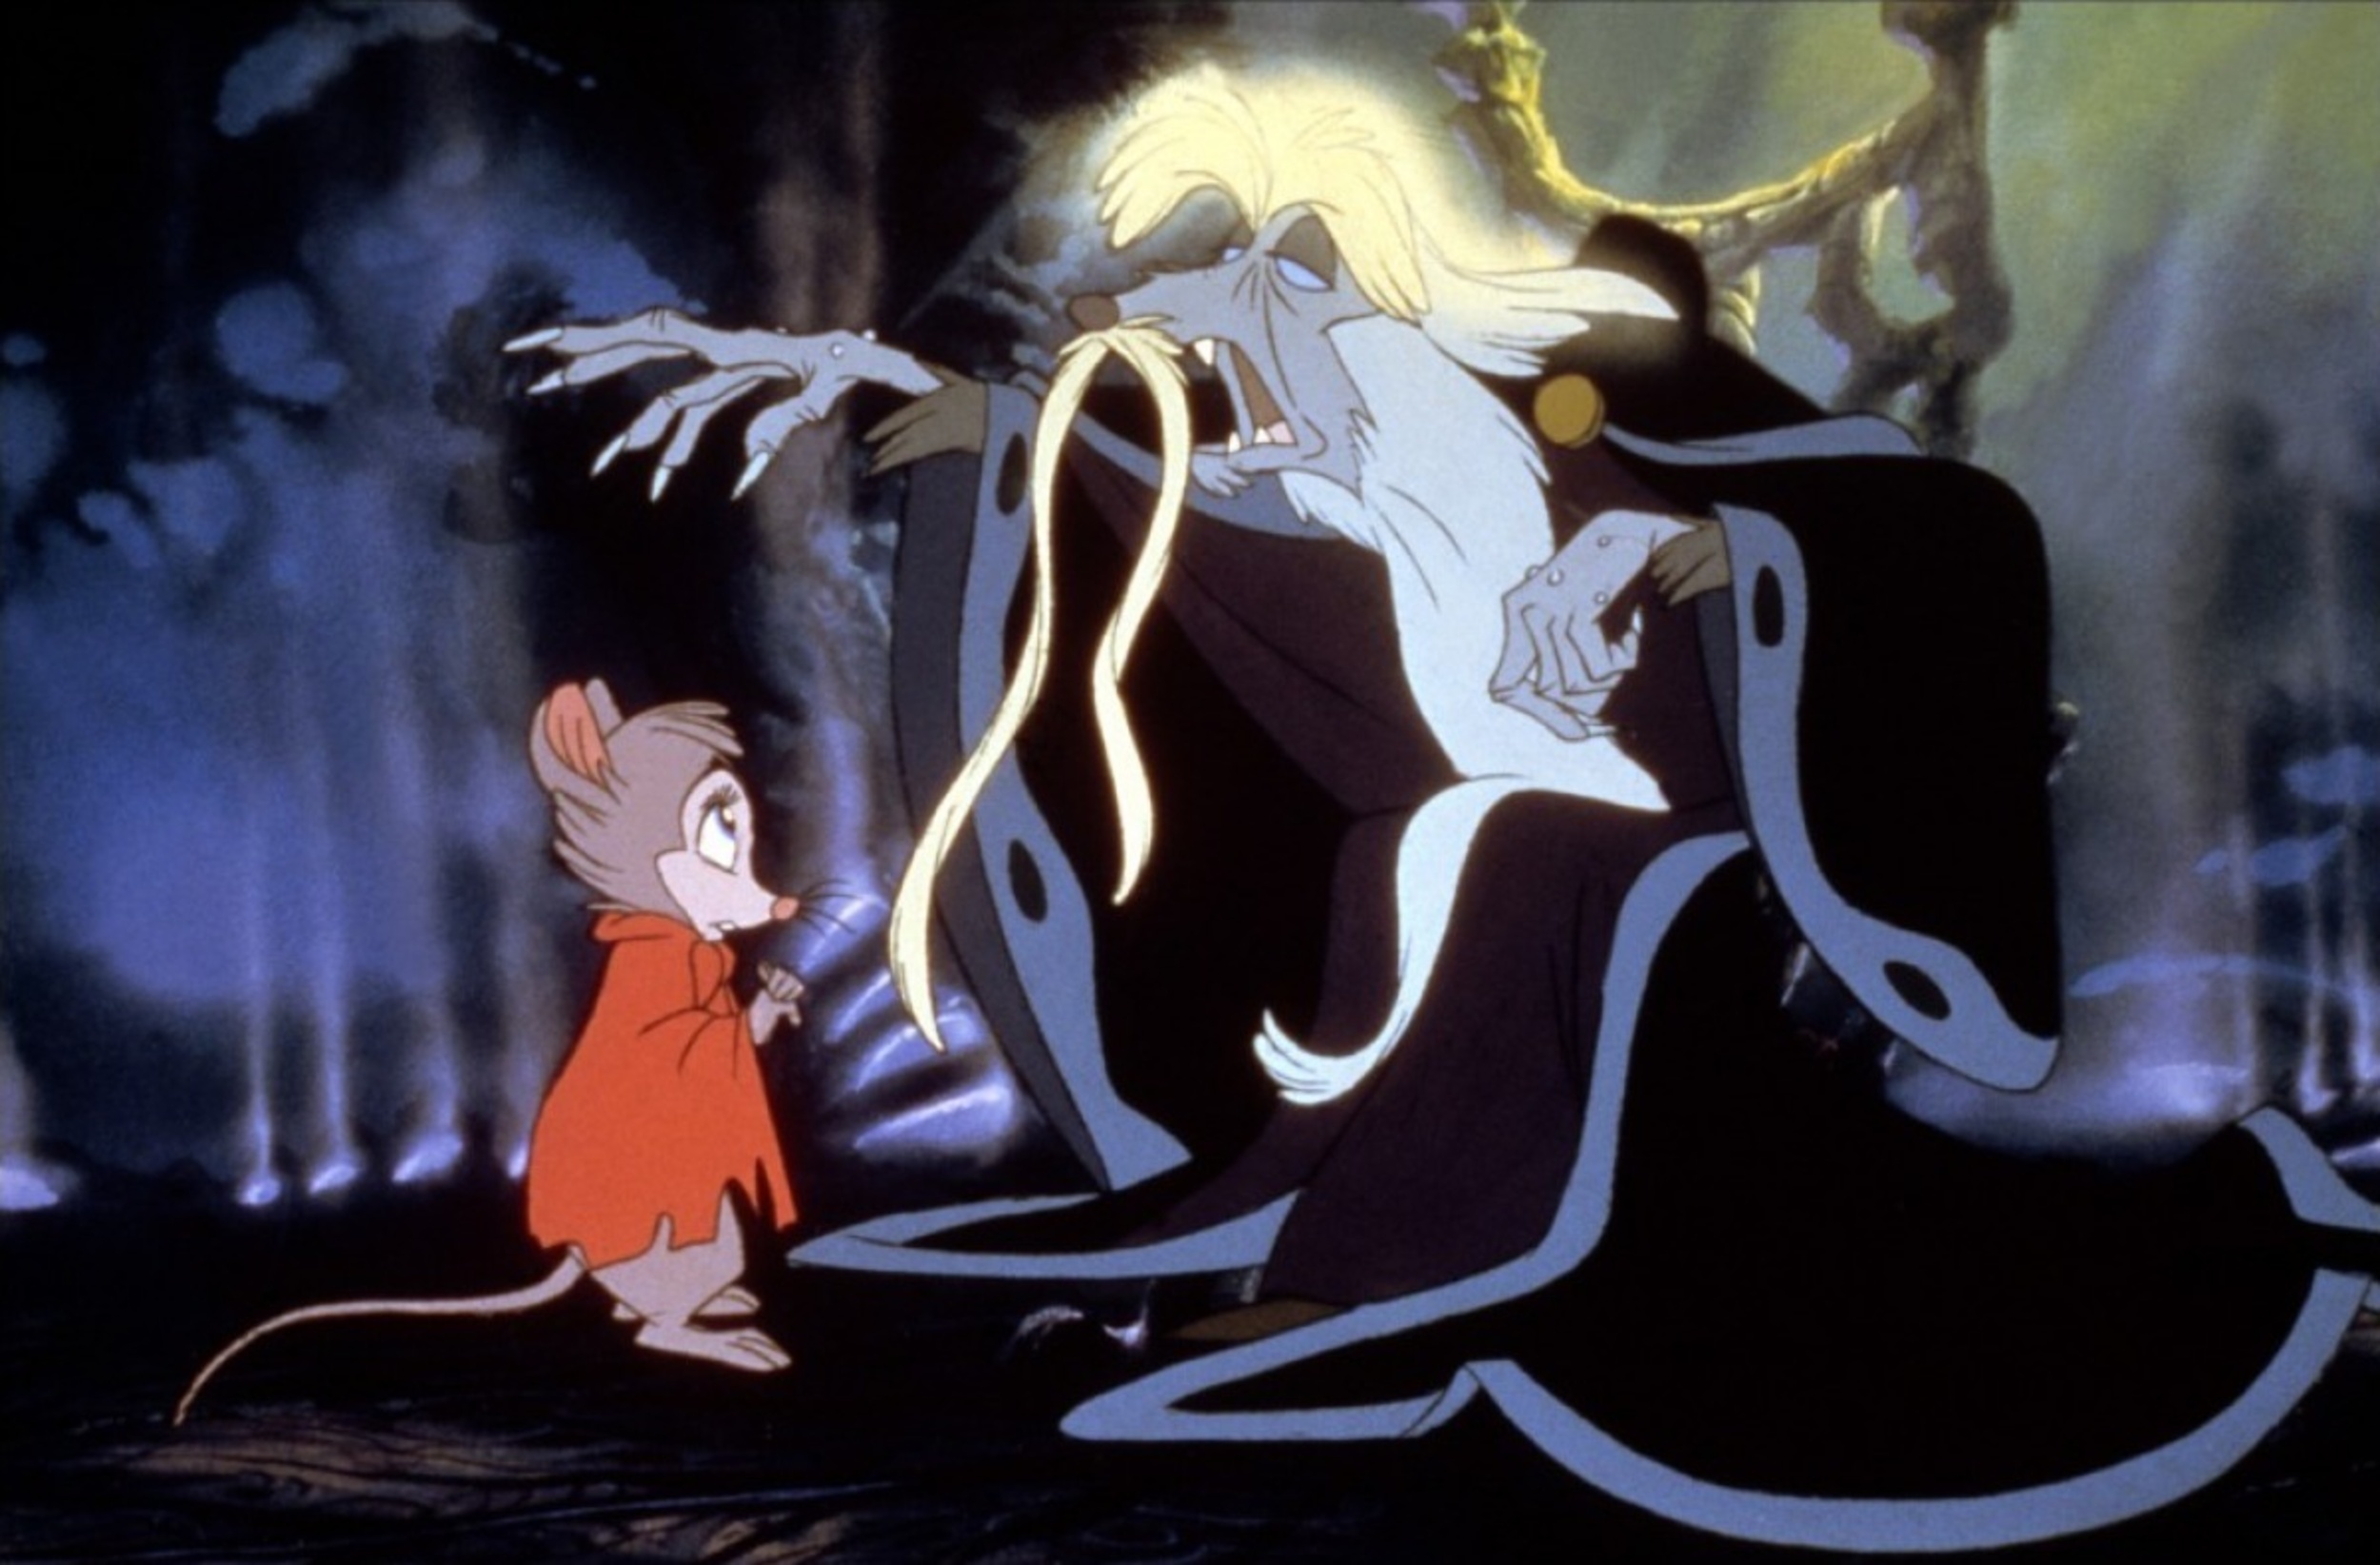 <p><em>The Secret of NIMH</em> <span>remains one of the best films ever made by Don Bluth. Focusing on a mother mouse, Mrs. Brisby, and her efforts to rescue her family from the local farmer, it’s filled with startlingly vivid and sometimes disturbing imagery, particularly once Mrs. Brisby decides to visit the quasi-mystical rats that live in the rosebush. However, this film also has lighter moments of humor, embodied in Jeremy the Crow (voiced by the late great Dom DeLuise). It’s the type of animated film that features the perfect pairing of the fascinating premise with gorgeous execution, and it’s one of the director’s works that most fully captures something like the magic of Disney.</span></p><p><a href='https://www.msn.com/en-us/community/channel/vid-cj9pqbr0vn9in2b6ddcd8sfgpfq6x6utp44fssrv6mc2gtybw0us'>Did you enjoy this slideshow? Follow us on MSN to see more of our exclusive entertainment content.</a></p>